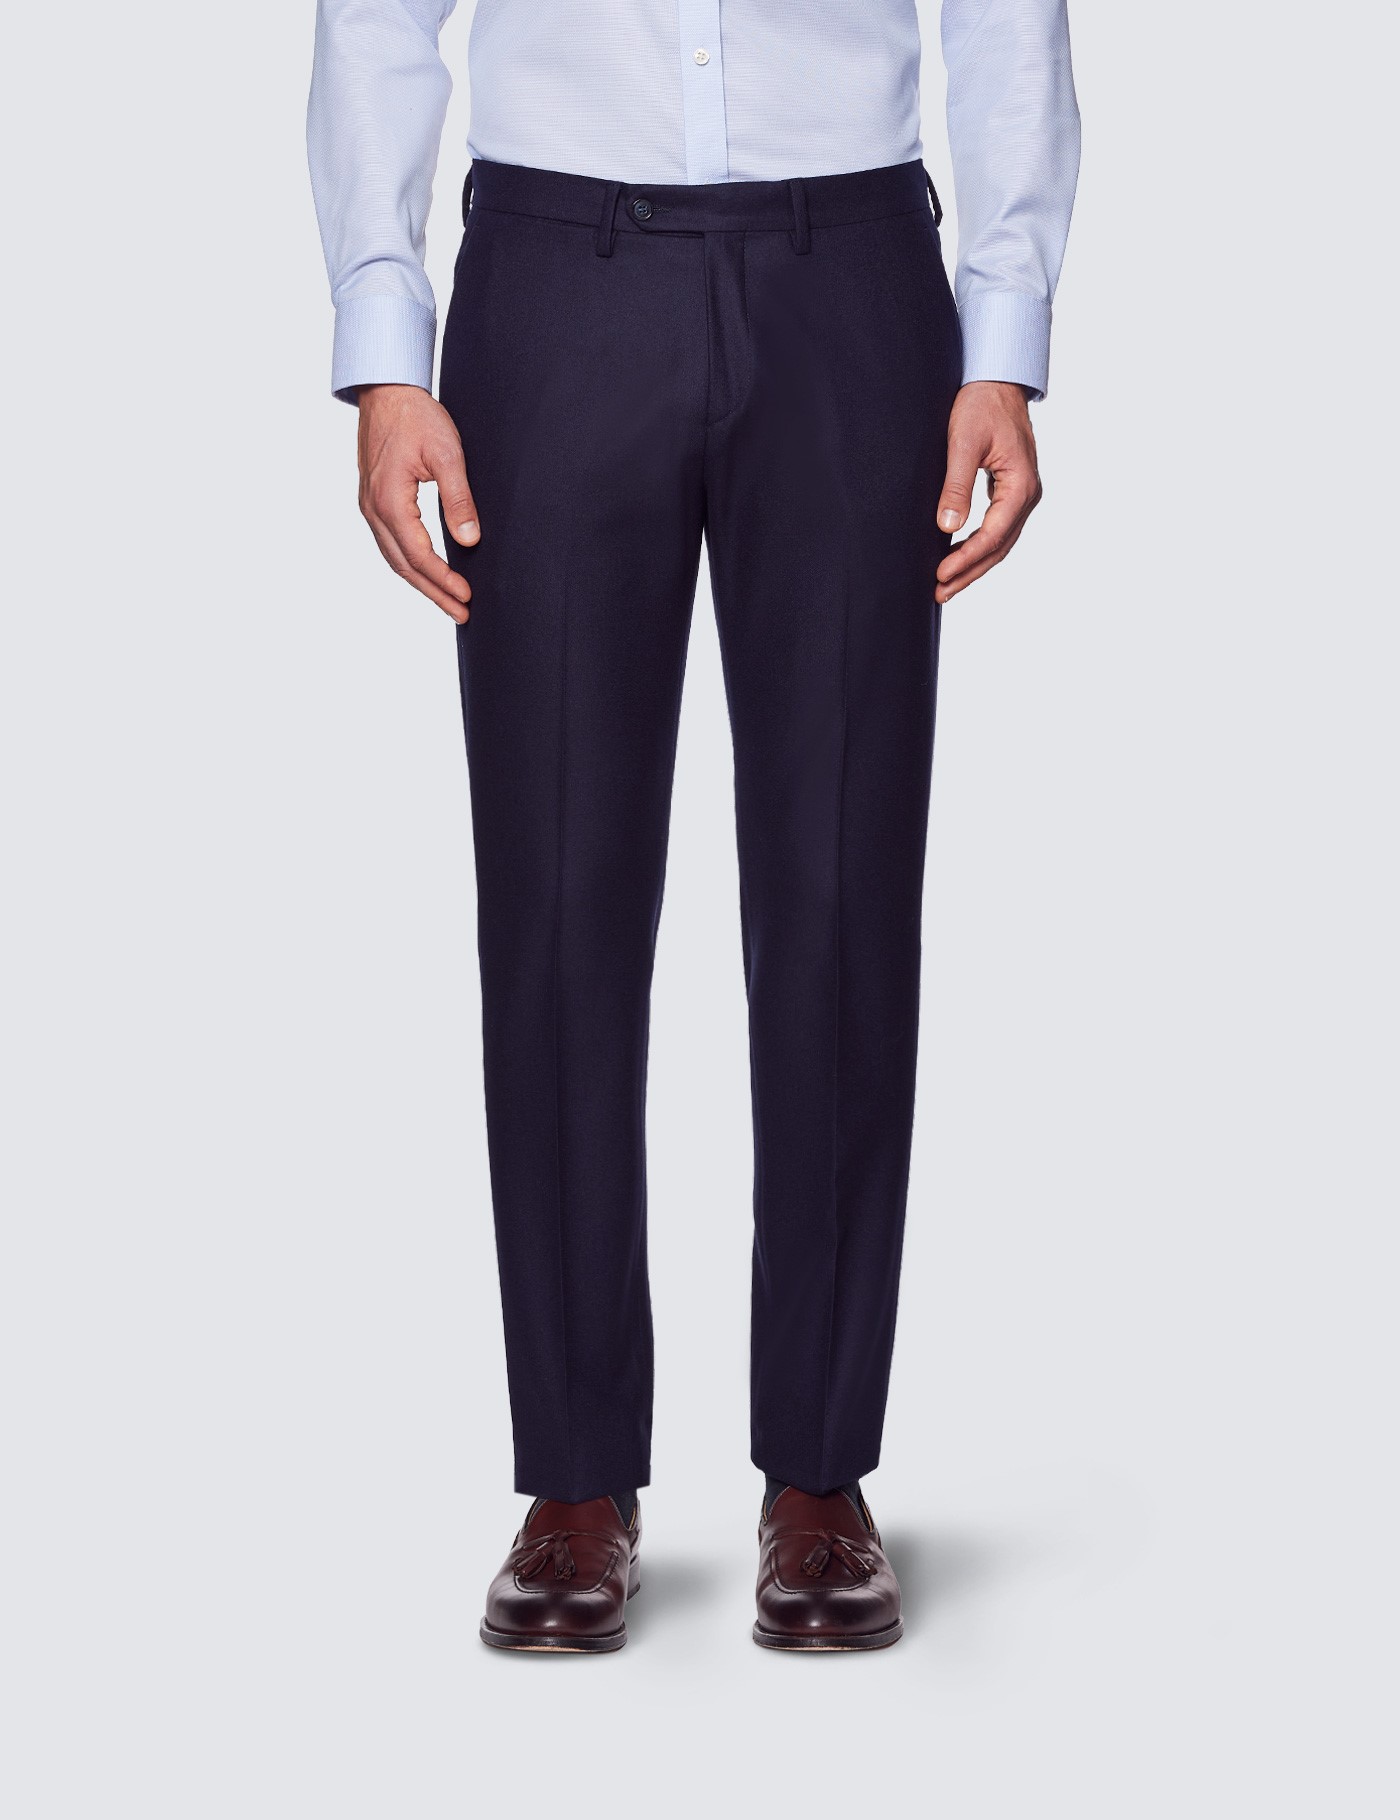 Marks  Spencer Mens Tapered Fit Suit Trousers 3448K33Blue Mix30   Amazonin Fashion